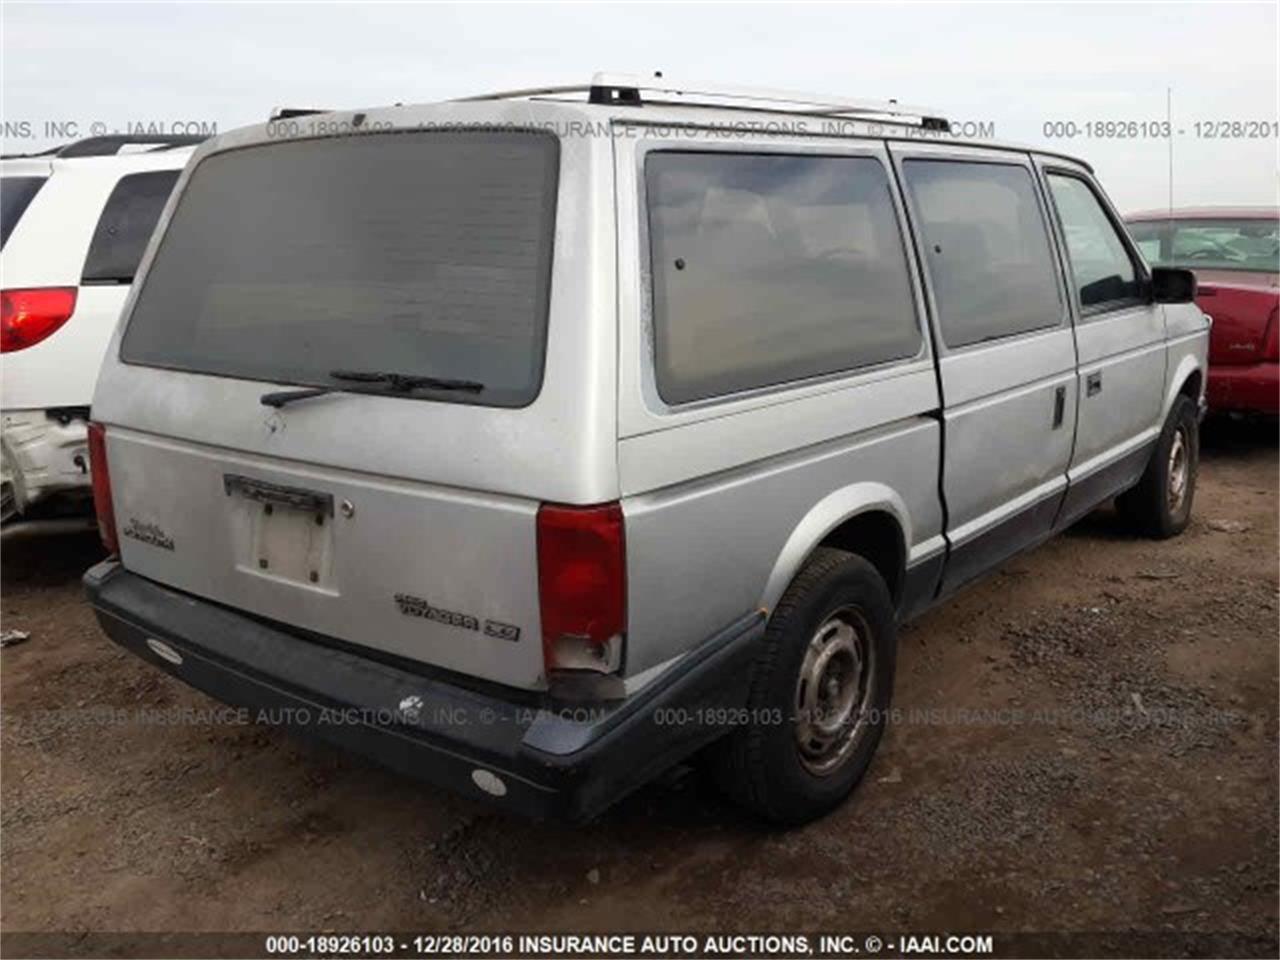 1989 plymouth grand voyager for sale